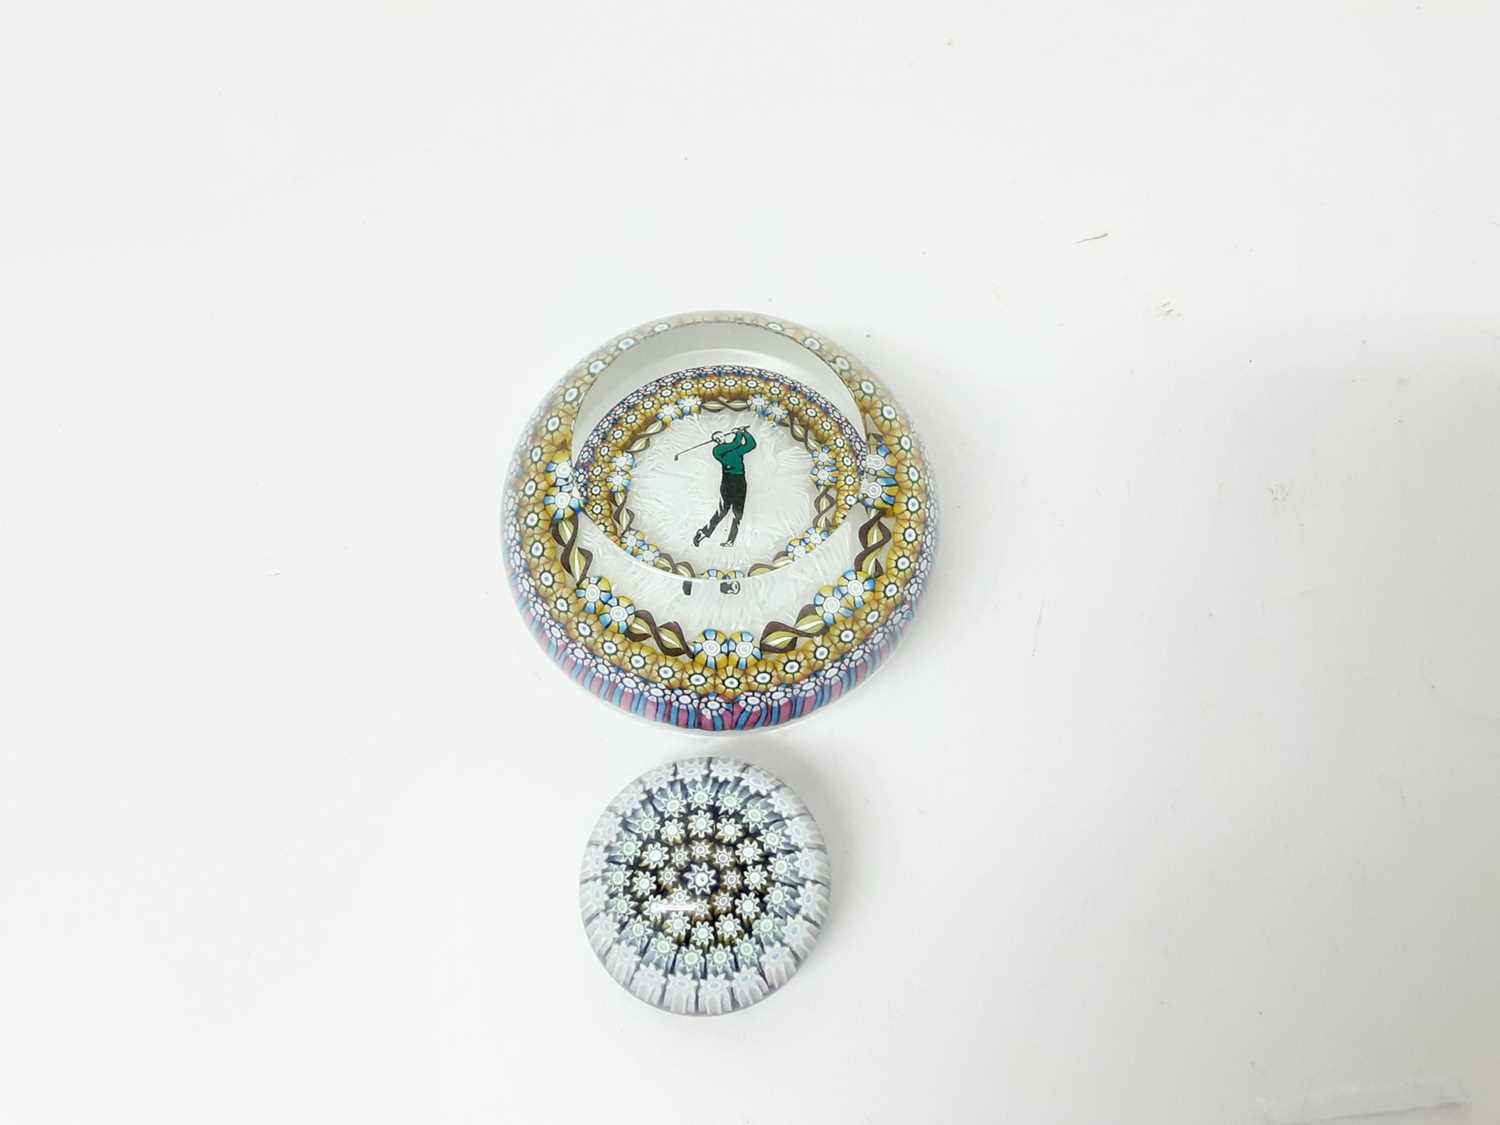 Lot 1130 - Good quality Perthshire Golfer paperweight with millifiori decoration and one other small Perthshire paperweight (2)